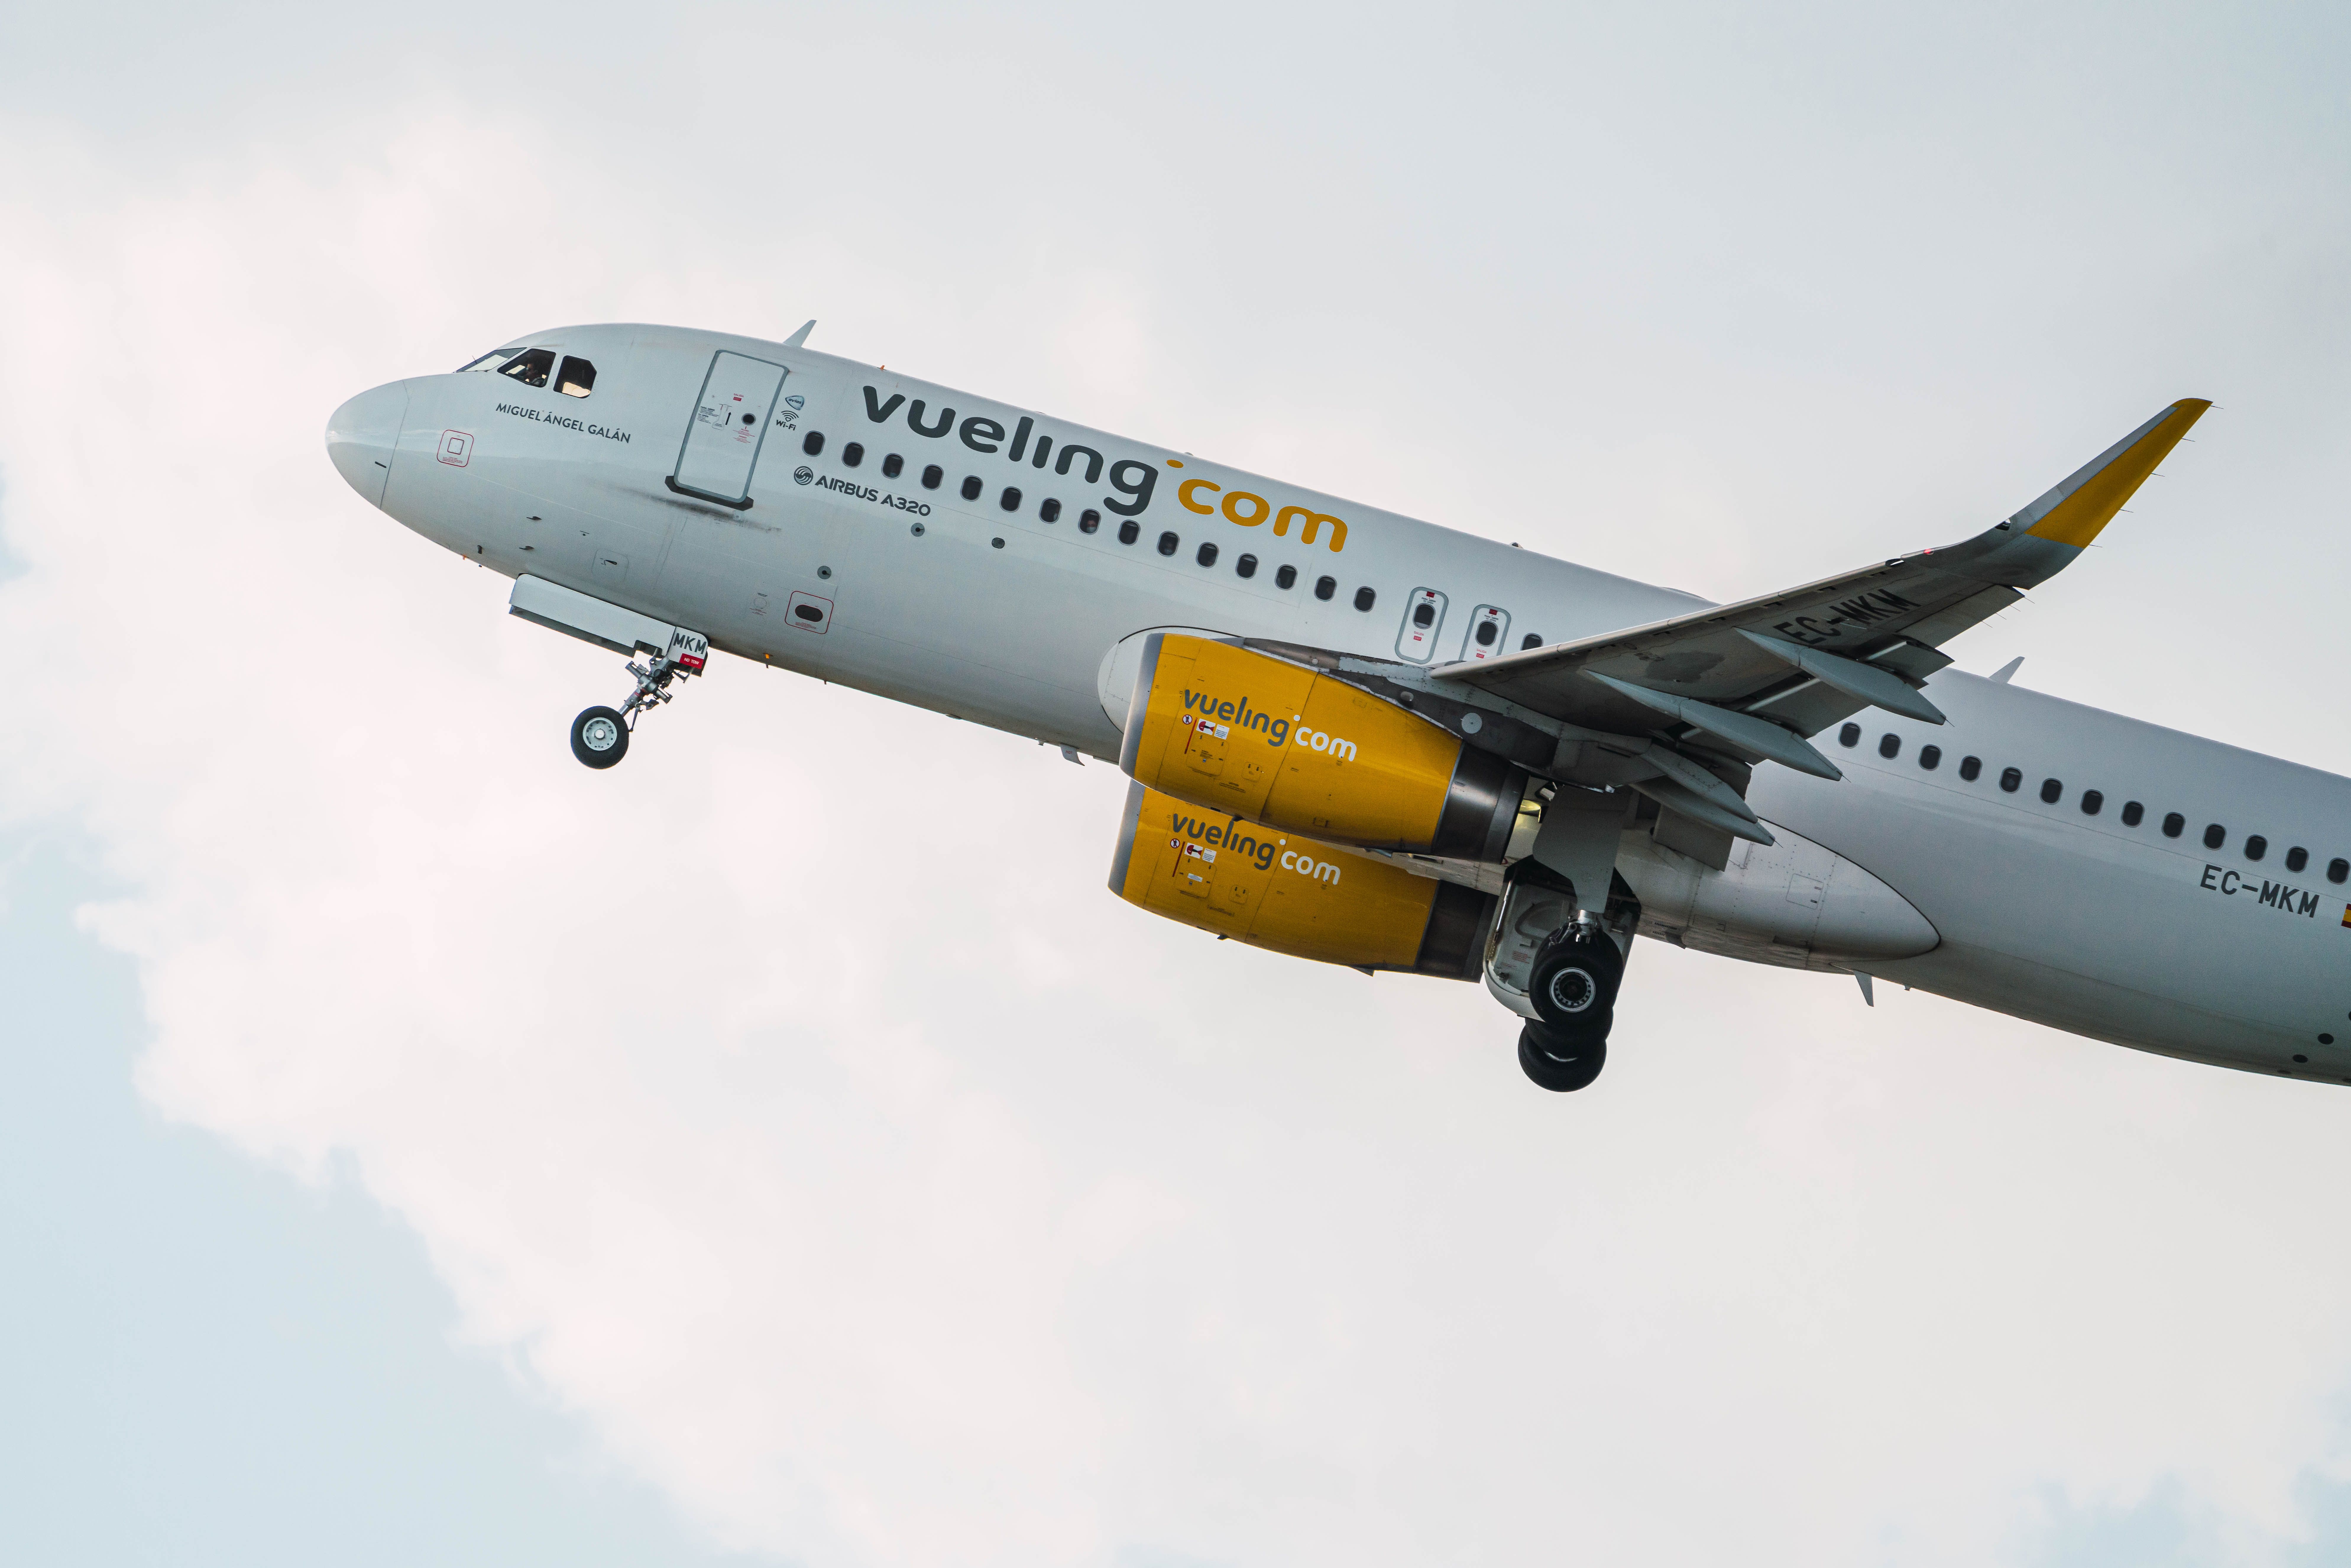 Vueling A320 with sharklets